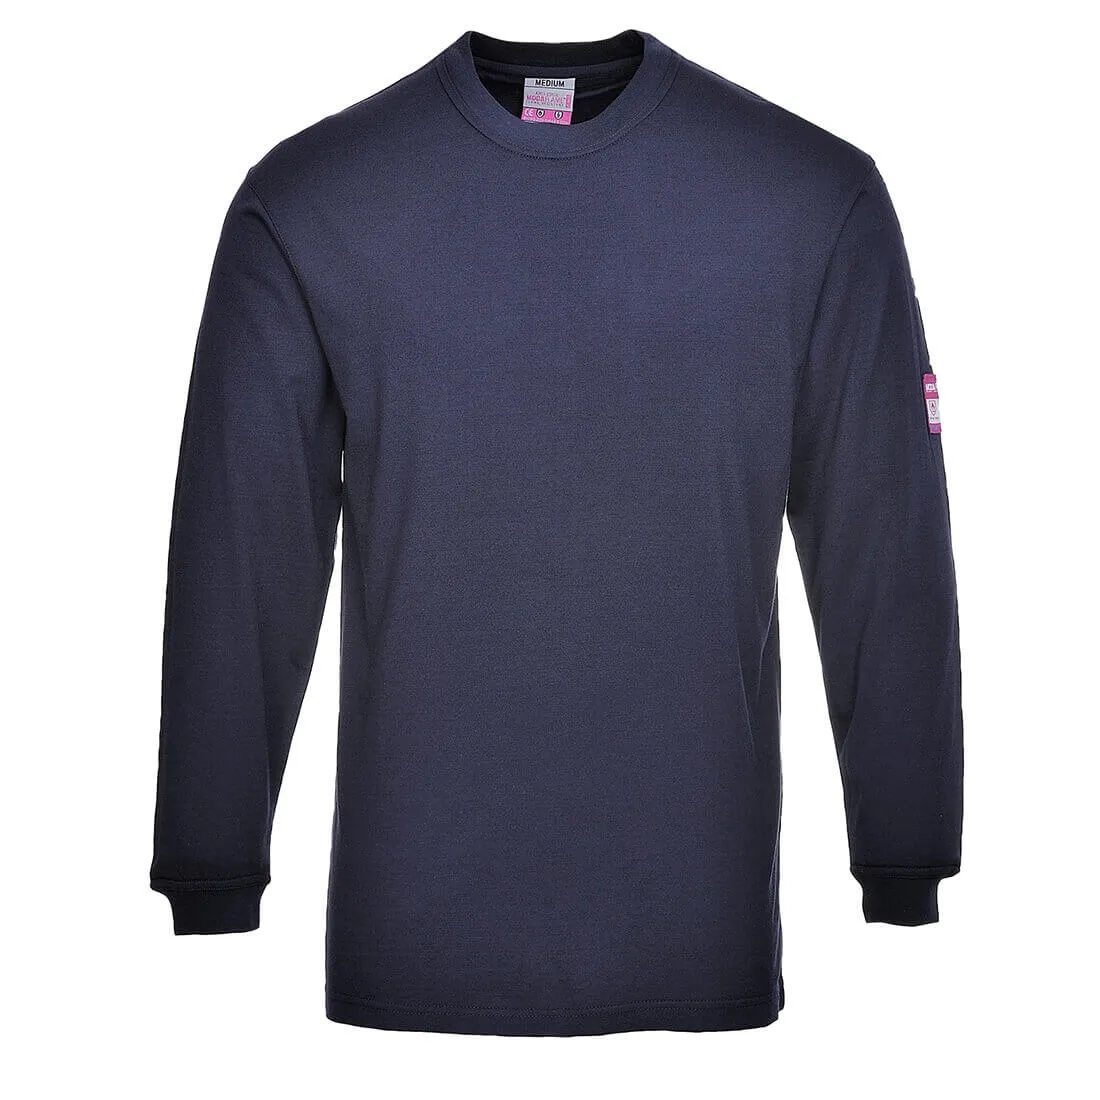 Modaflame Mens Flame Resistant Antistatic T-Shirt - Navy, 5XL